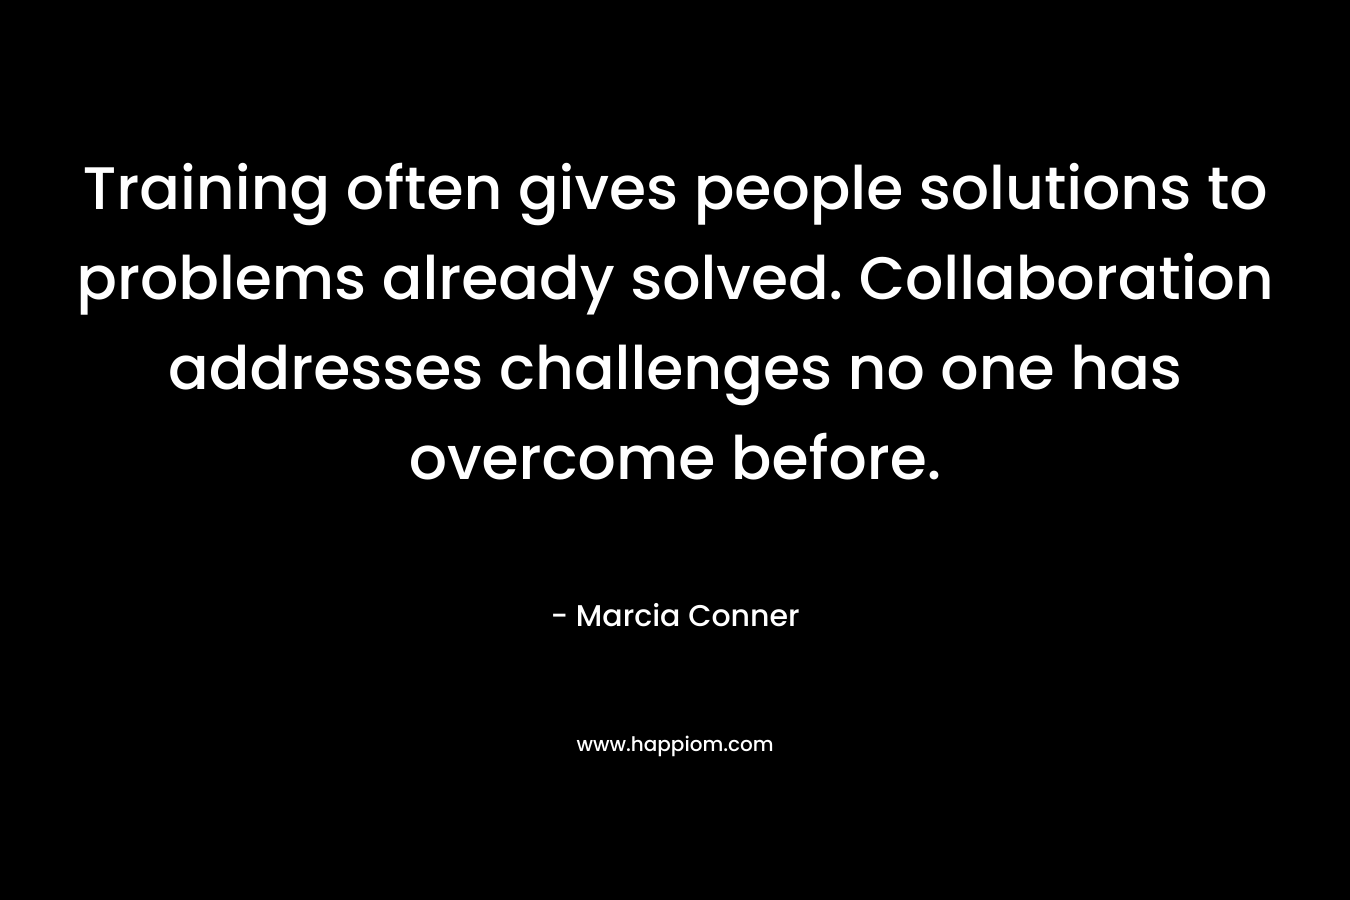 Training often gives people solutions to problems already solved. Collaboration addresses challenges no one has overcome before.